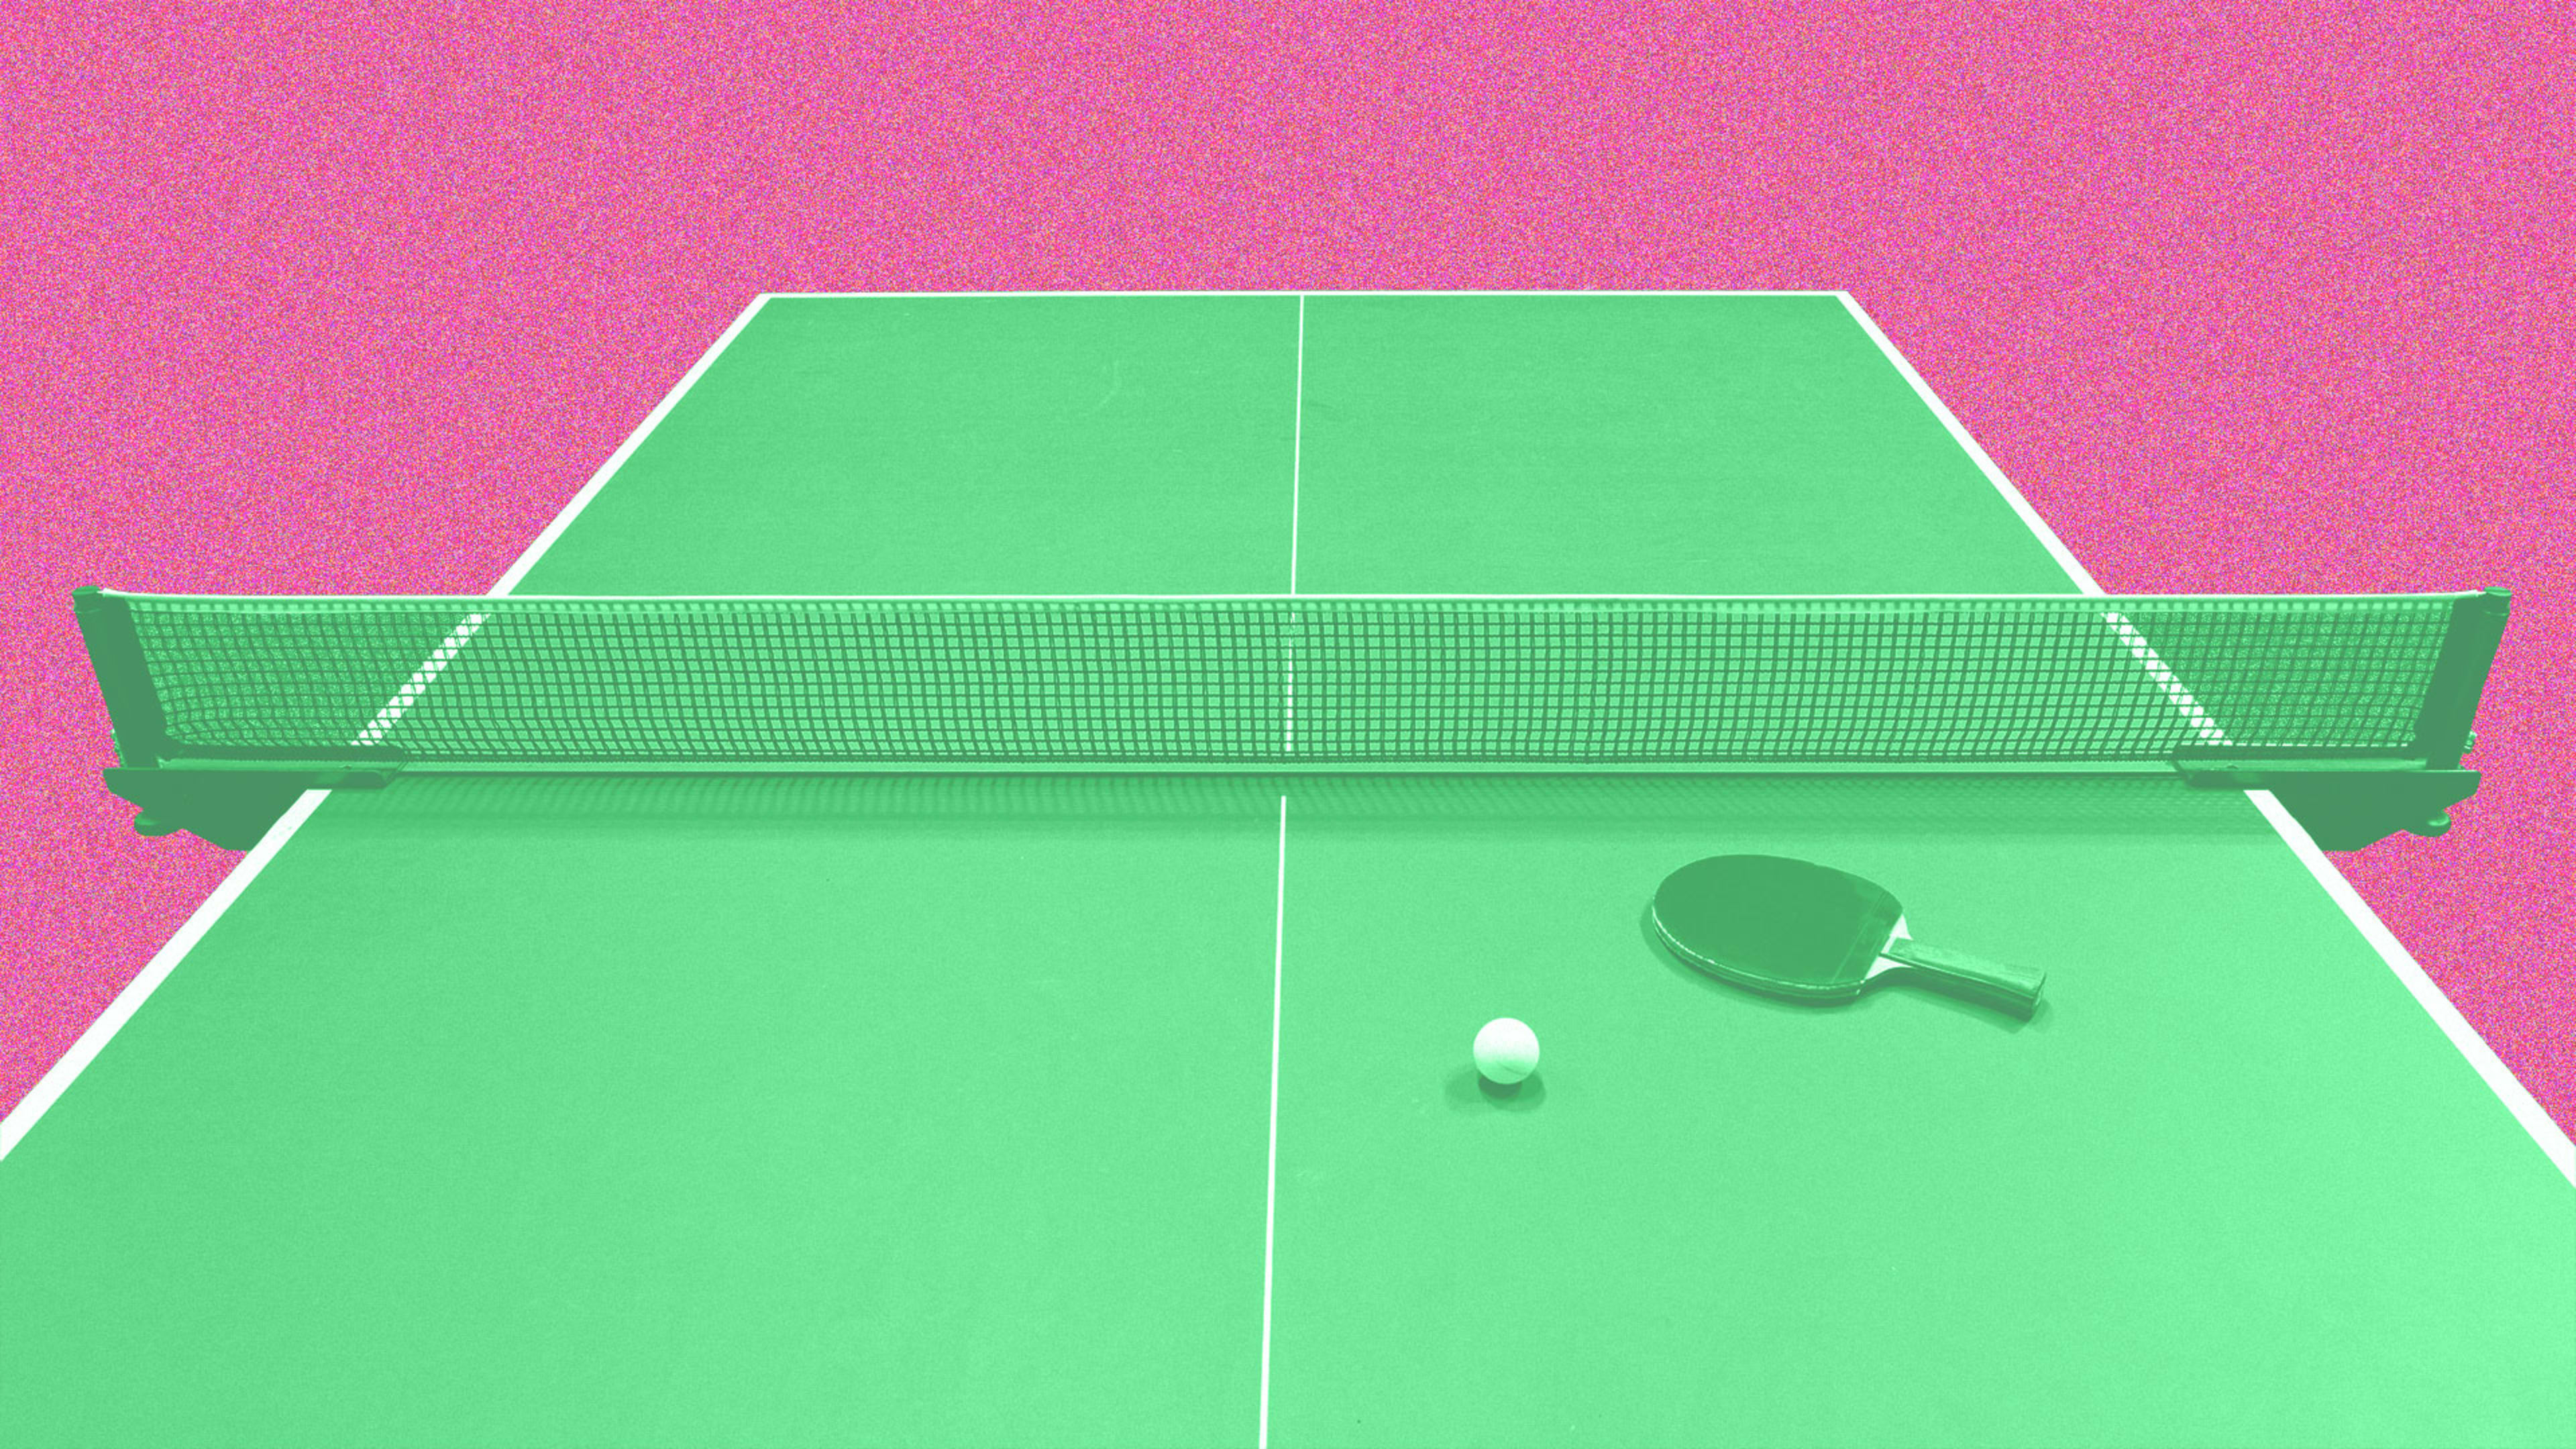 CEOs: Ask these 4 questions rather than buy a ping-pong table for your office